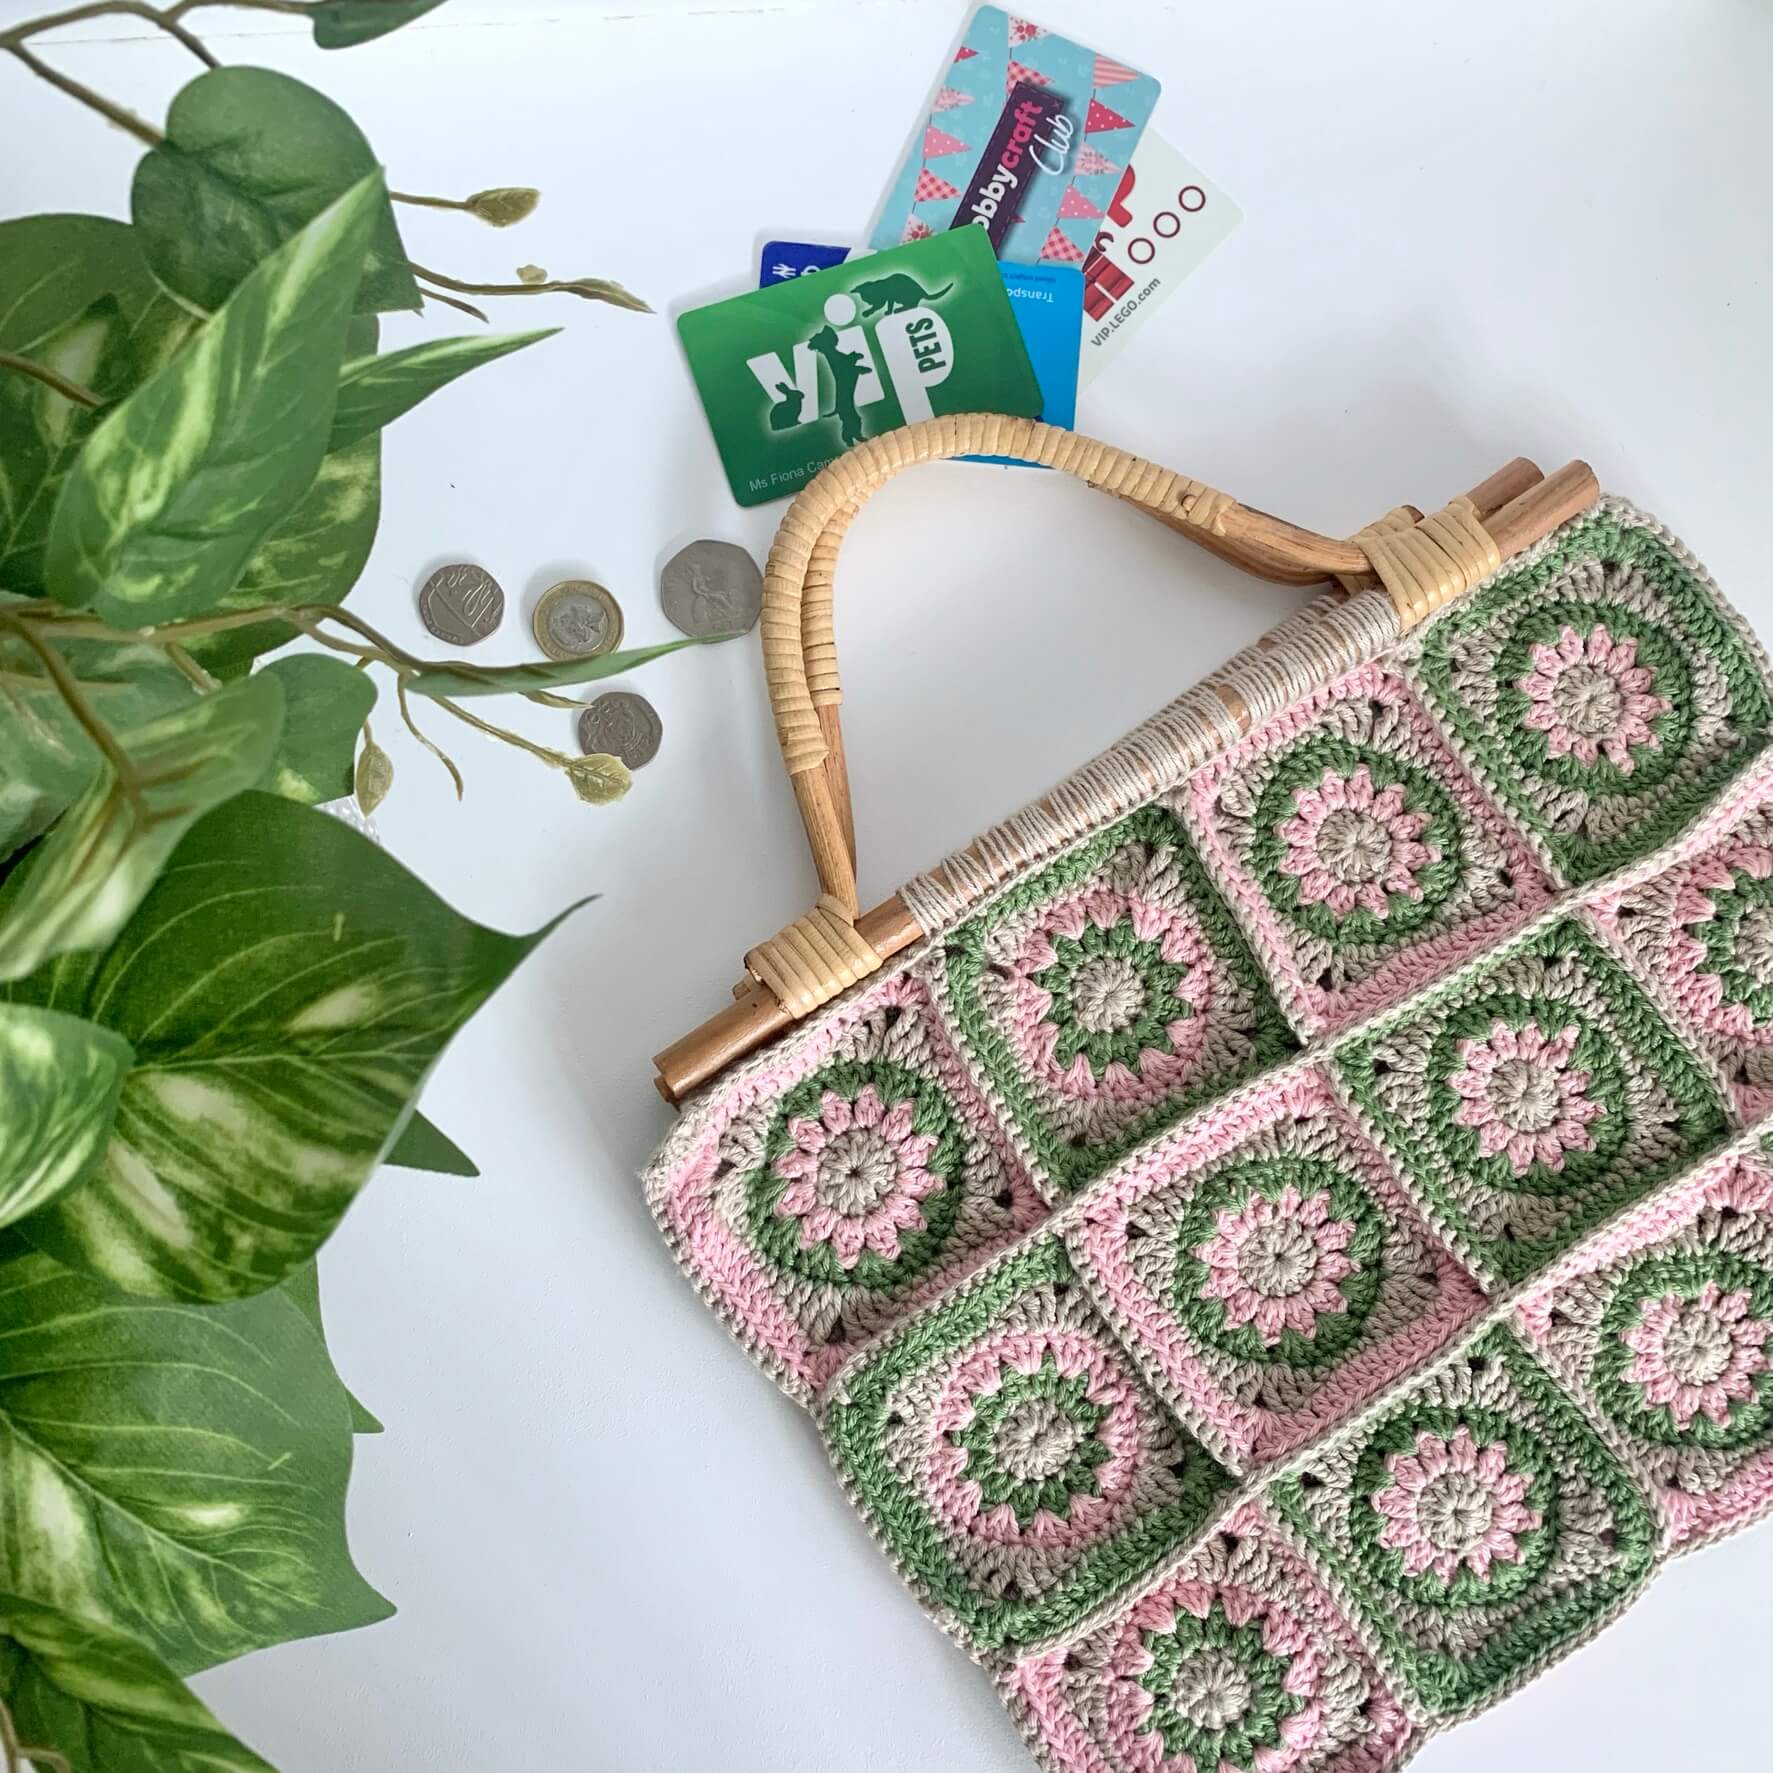 Crochet a granny Granny Square Bag with this pattern